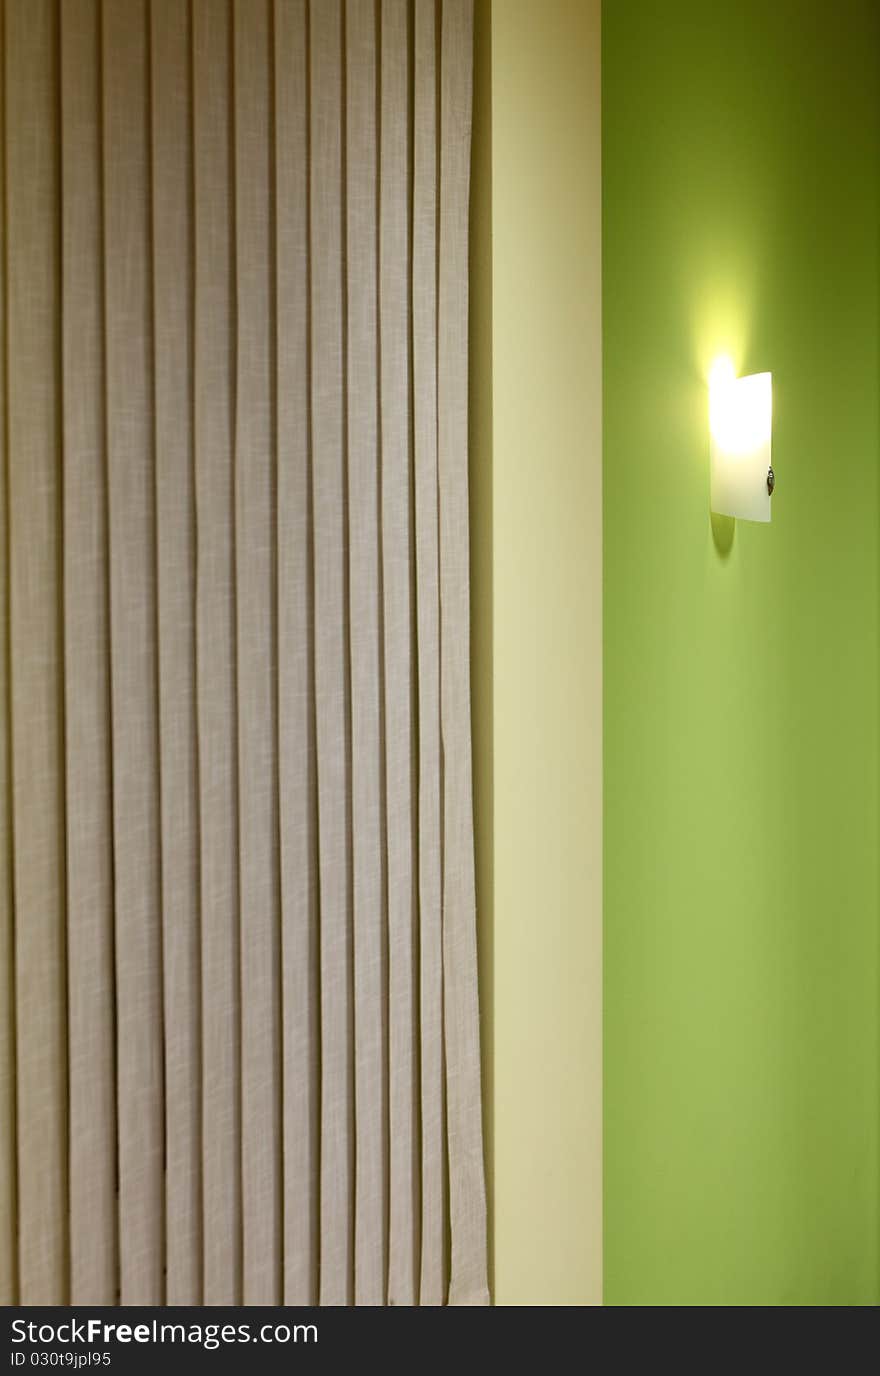 Wall lamp on the green background